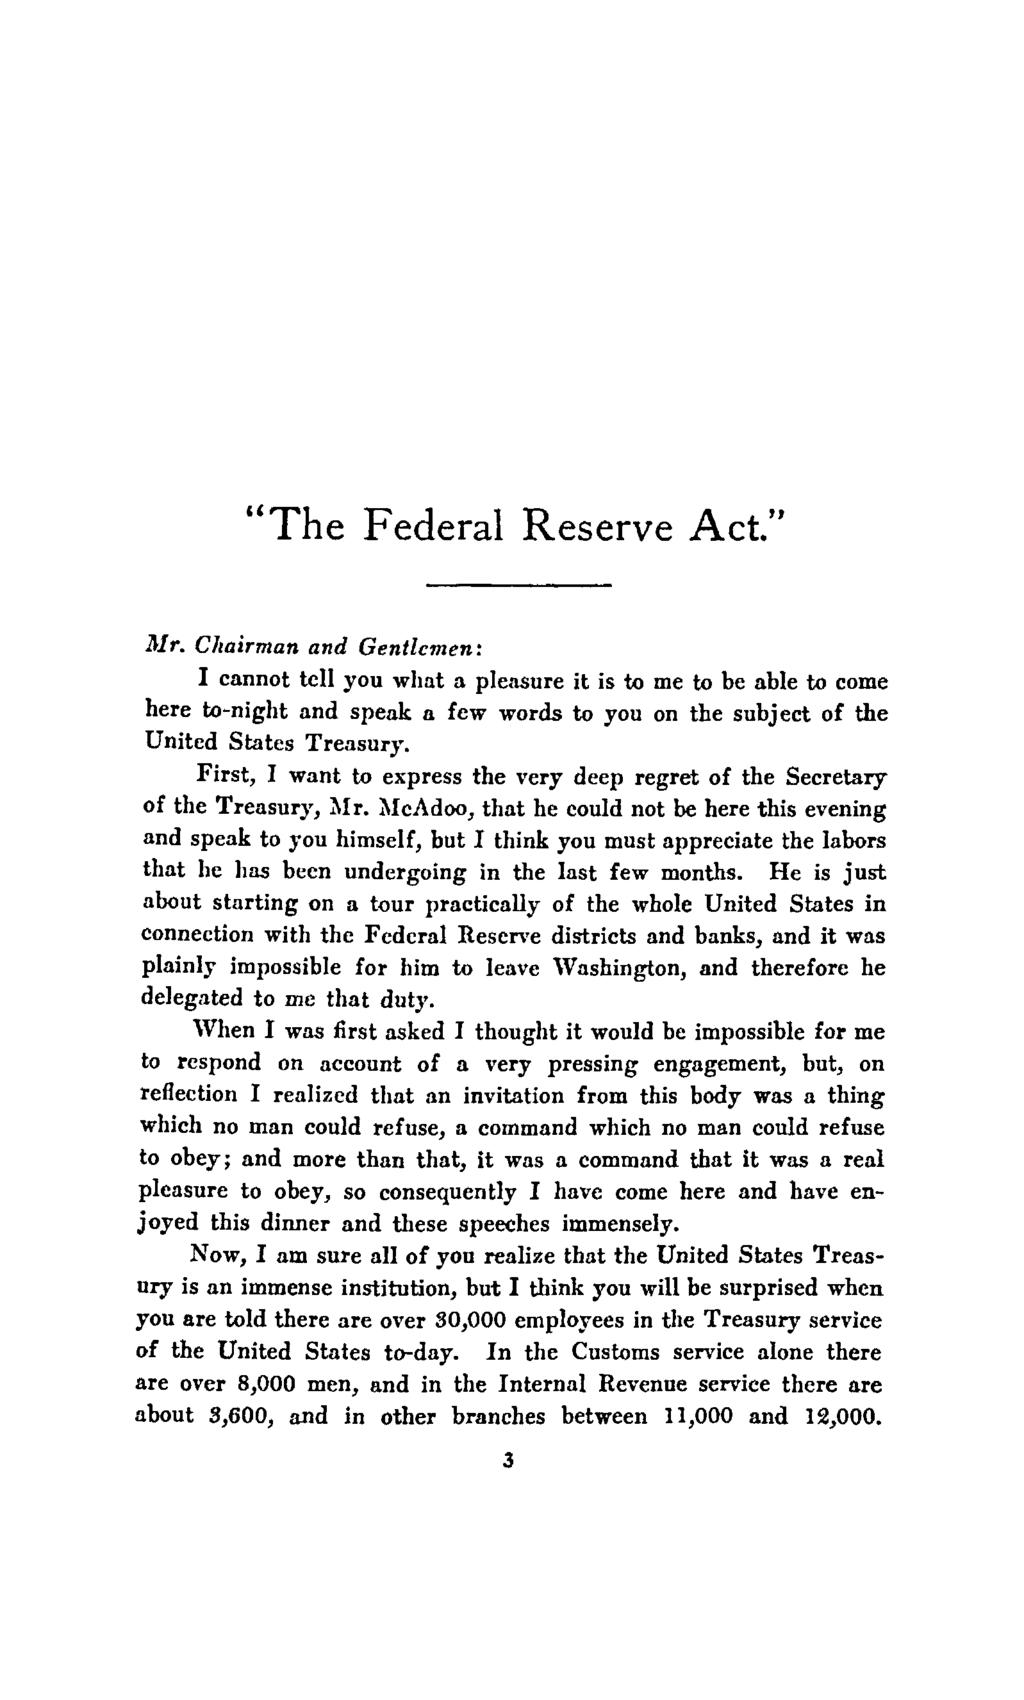 The Federal Reserve Act.